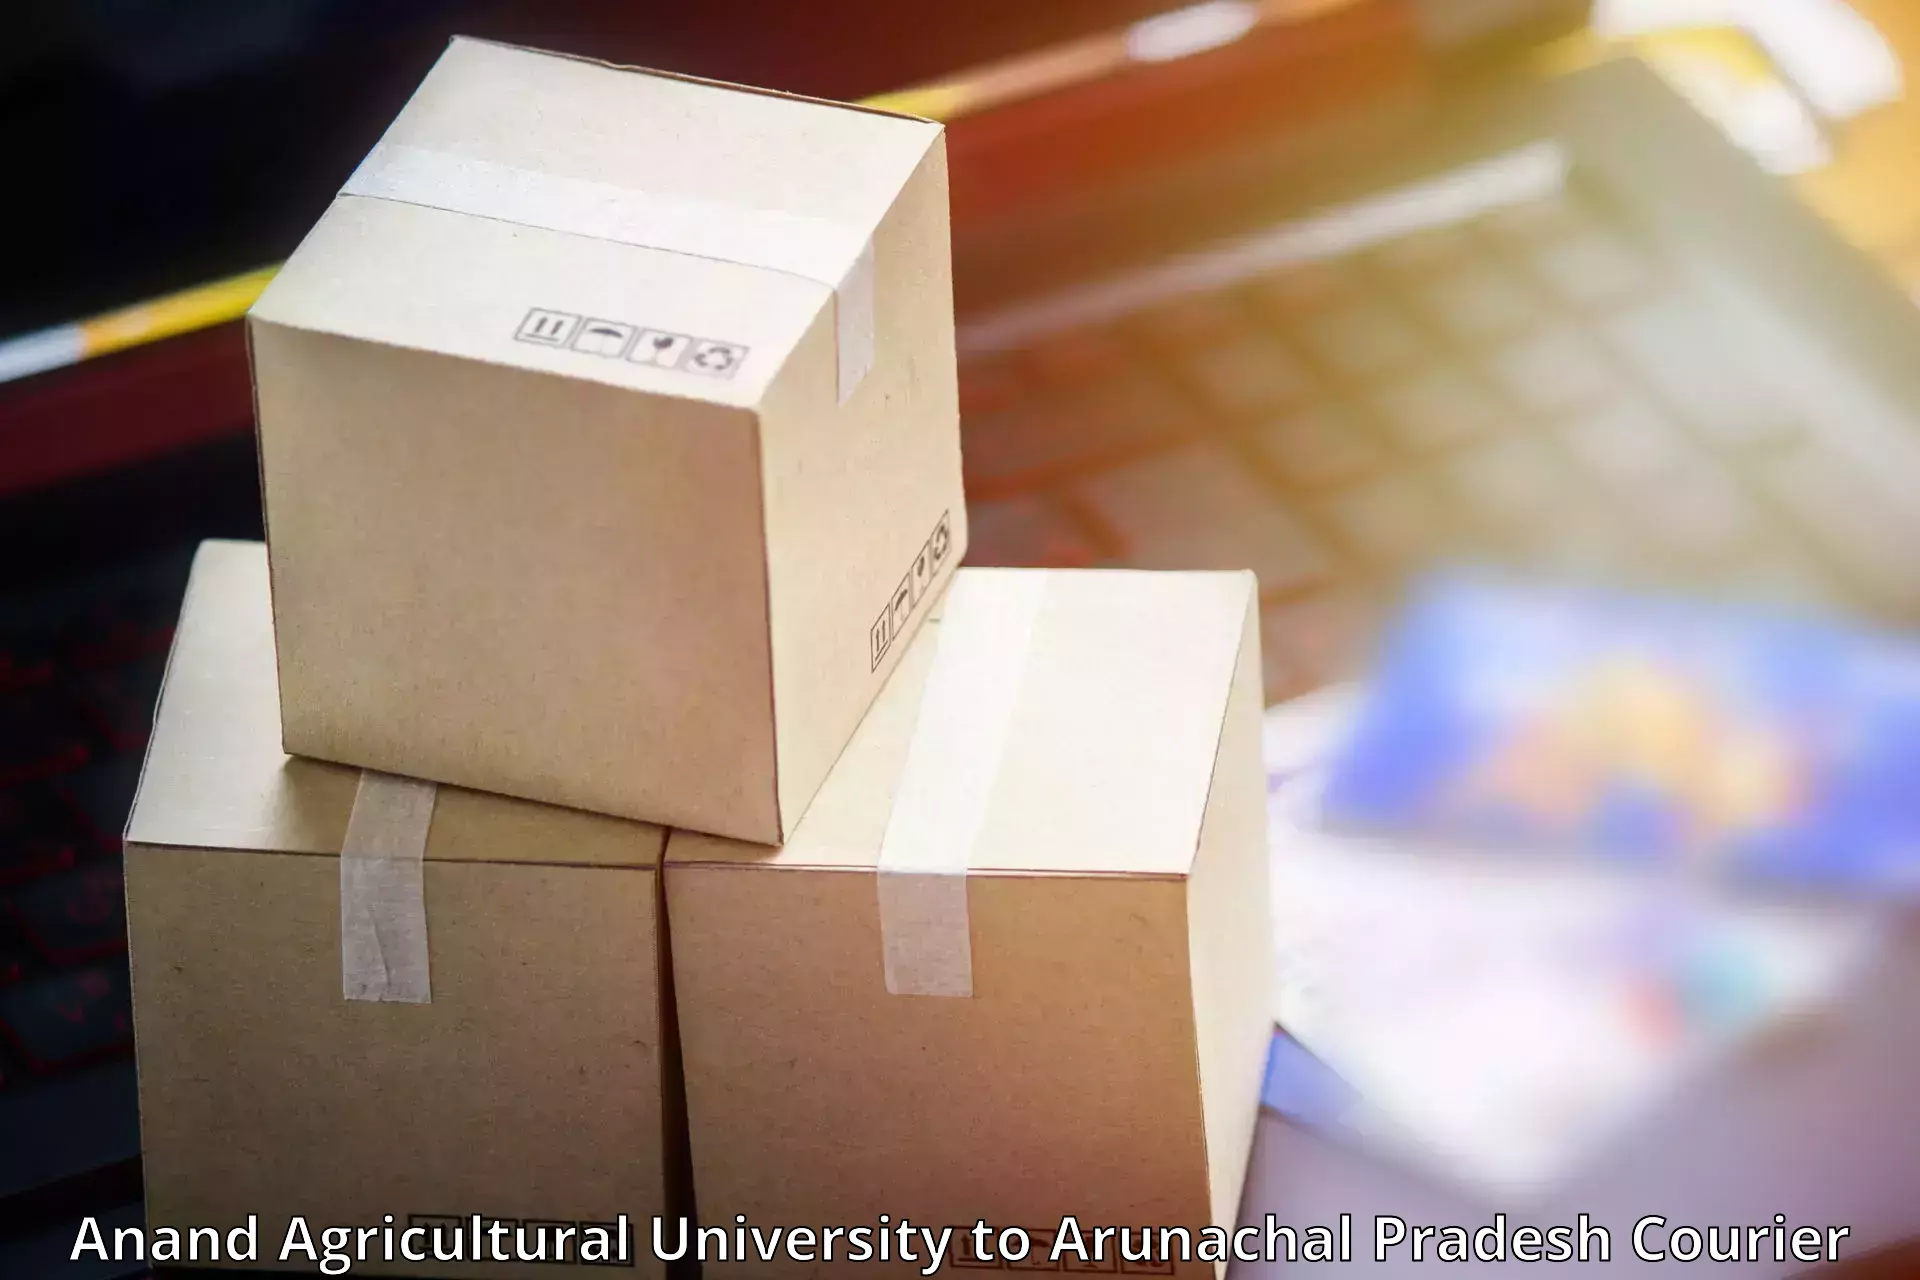 Dynamic courier operations Anand Agricultural University to Lohit